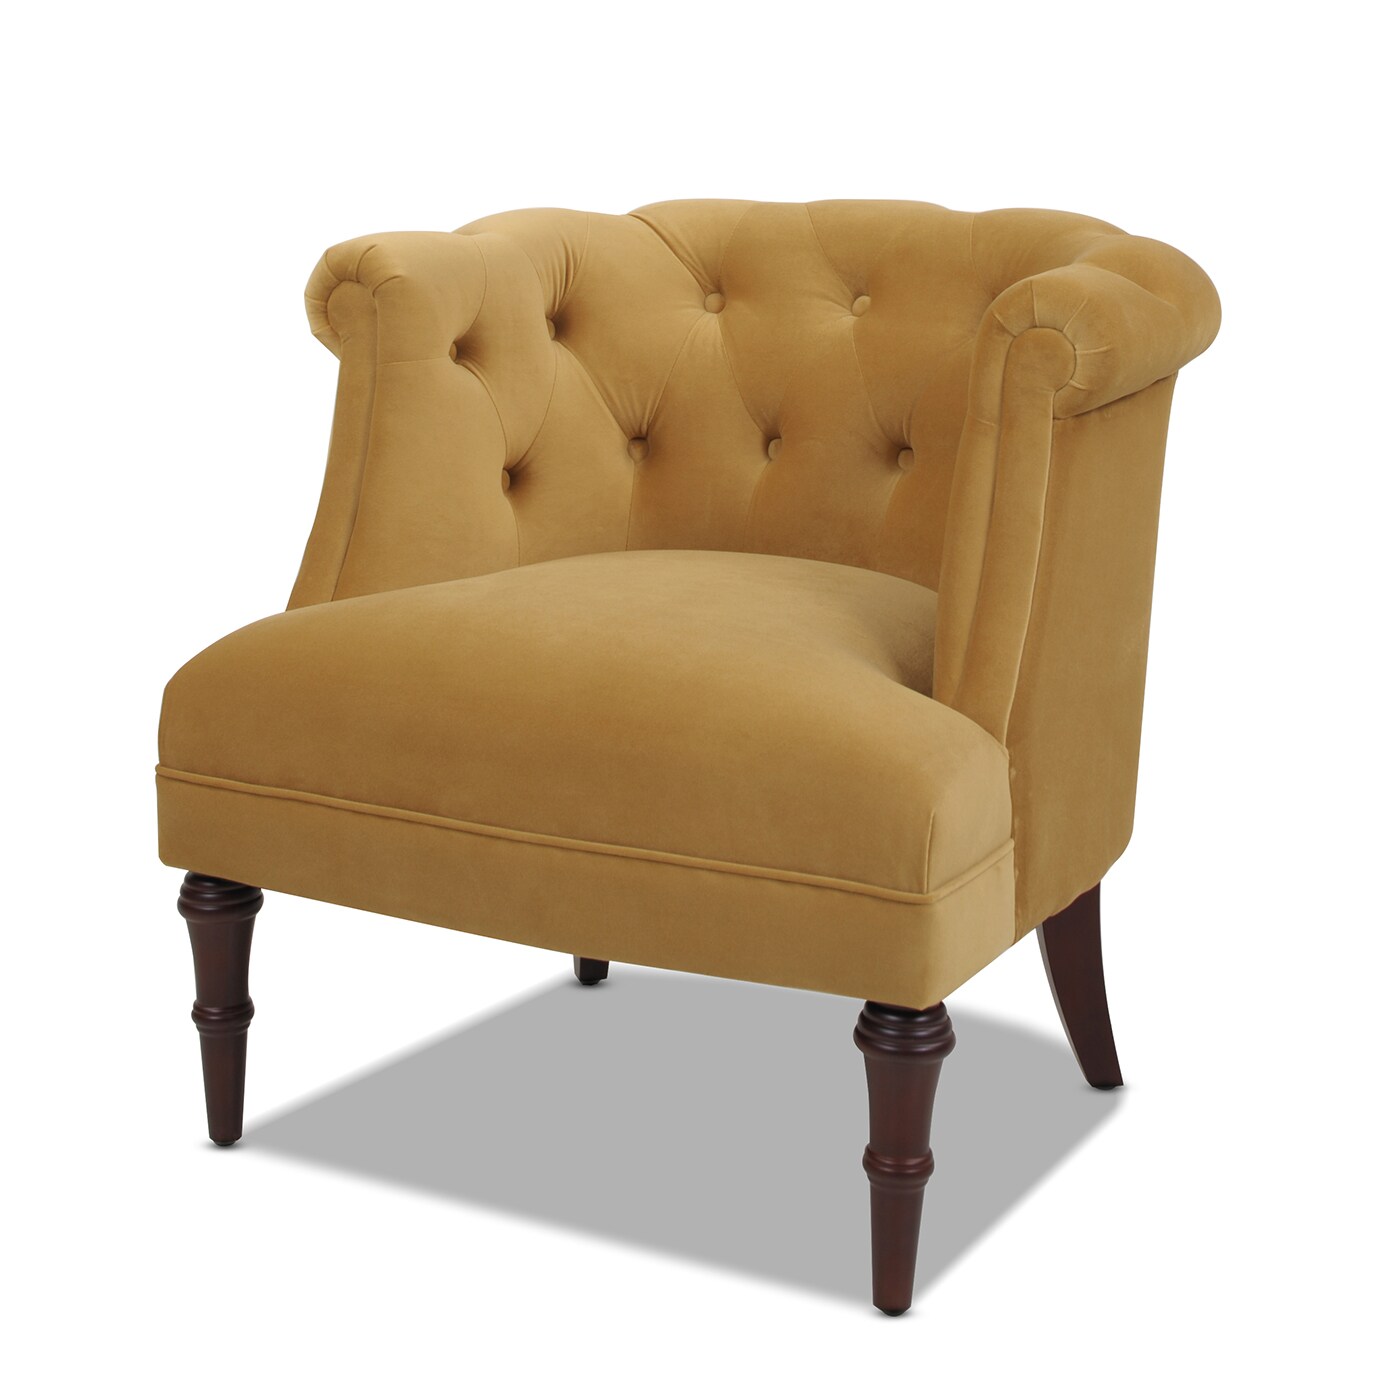 Chesterfield Chesterfield Style Armchair 6x Living Room Chairs With Armrests Upholstered New 